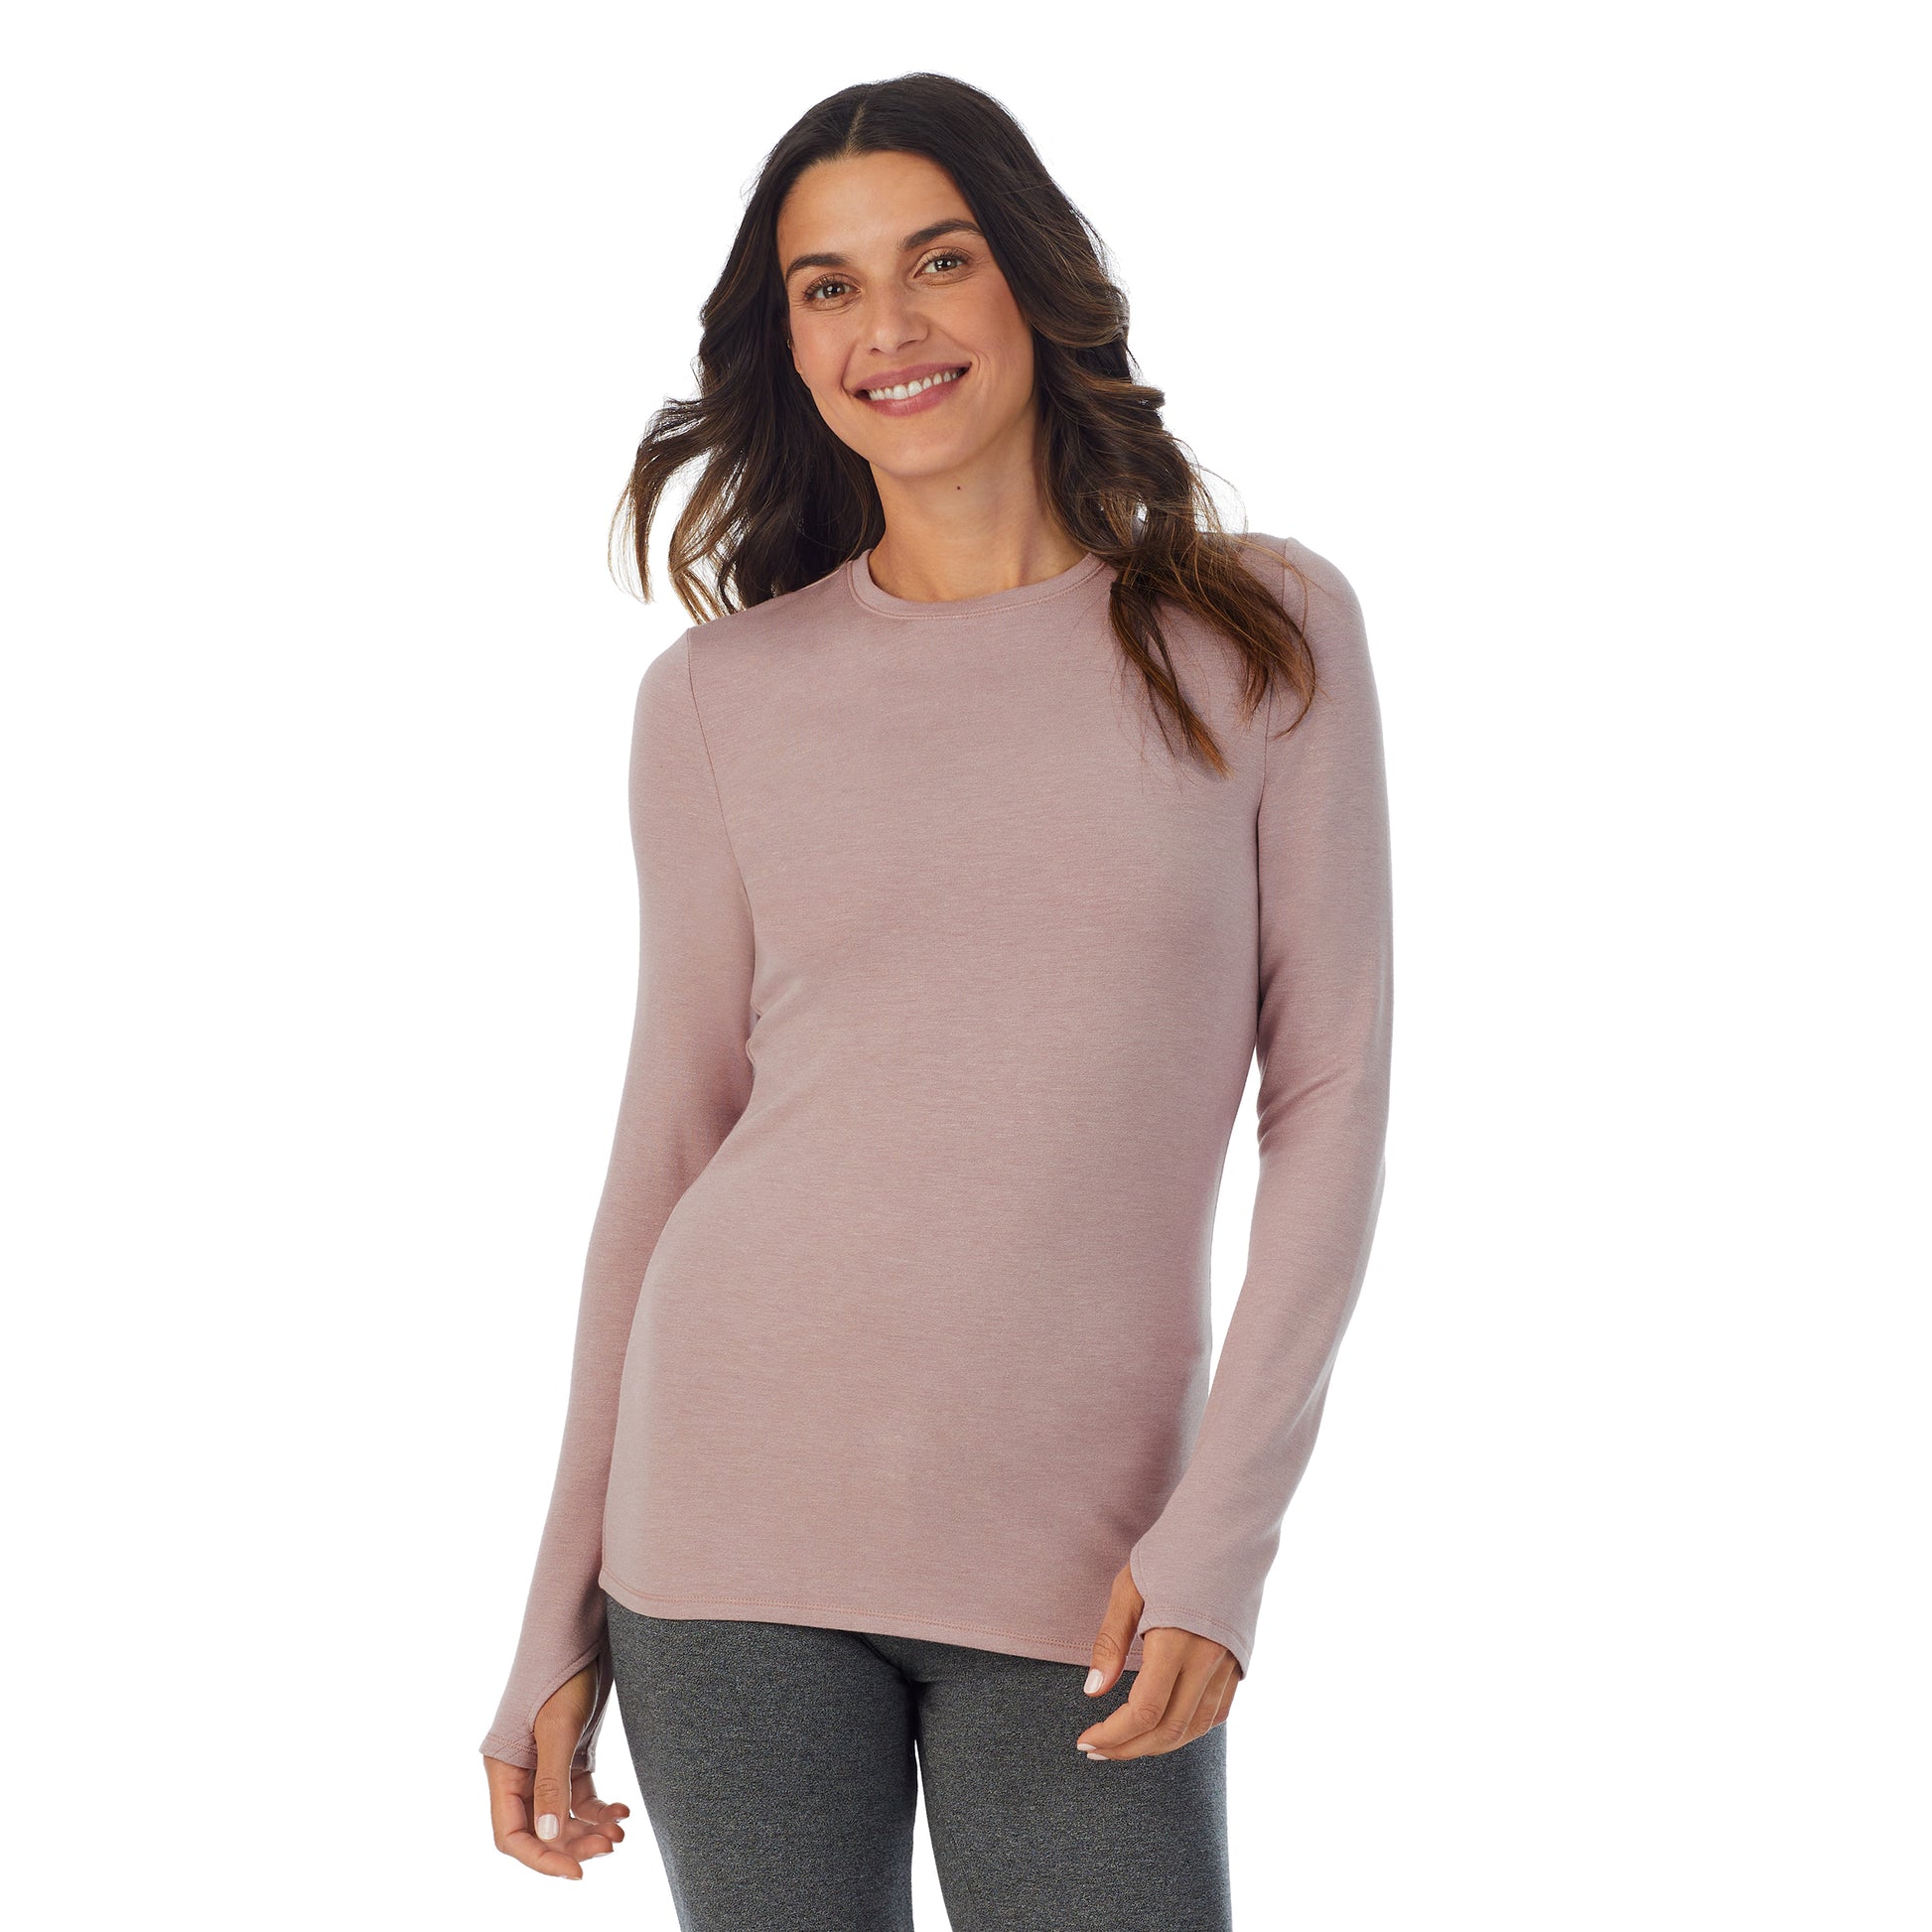 Mauve Shadow Heather; Model is wearing size S. She is 5’9”, Bust 34”, Waist 25.5”, Hips 36.5”. @A lady wearing a Mauve Shadow Heather long sleeve crew.